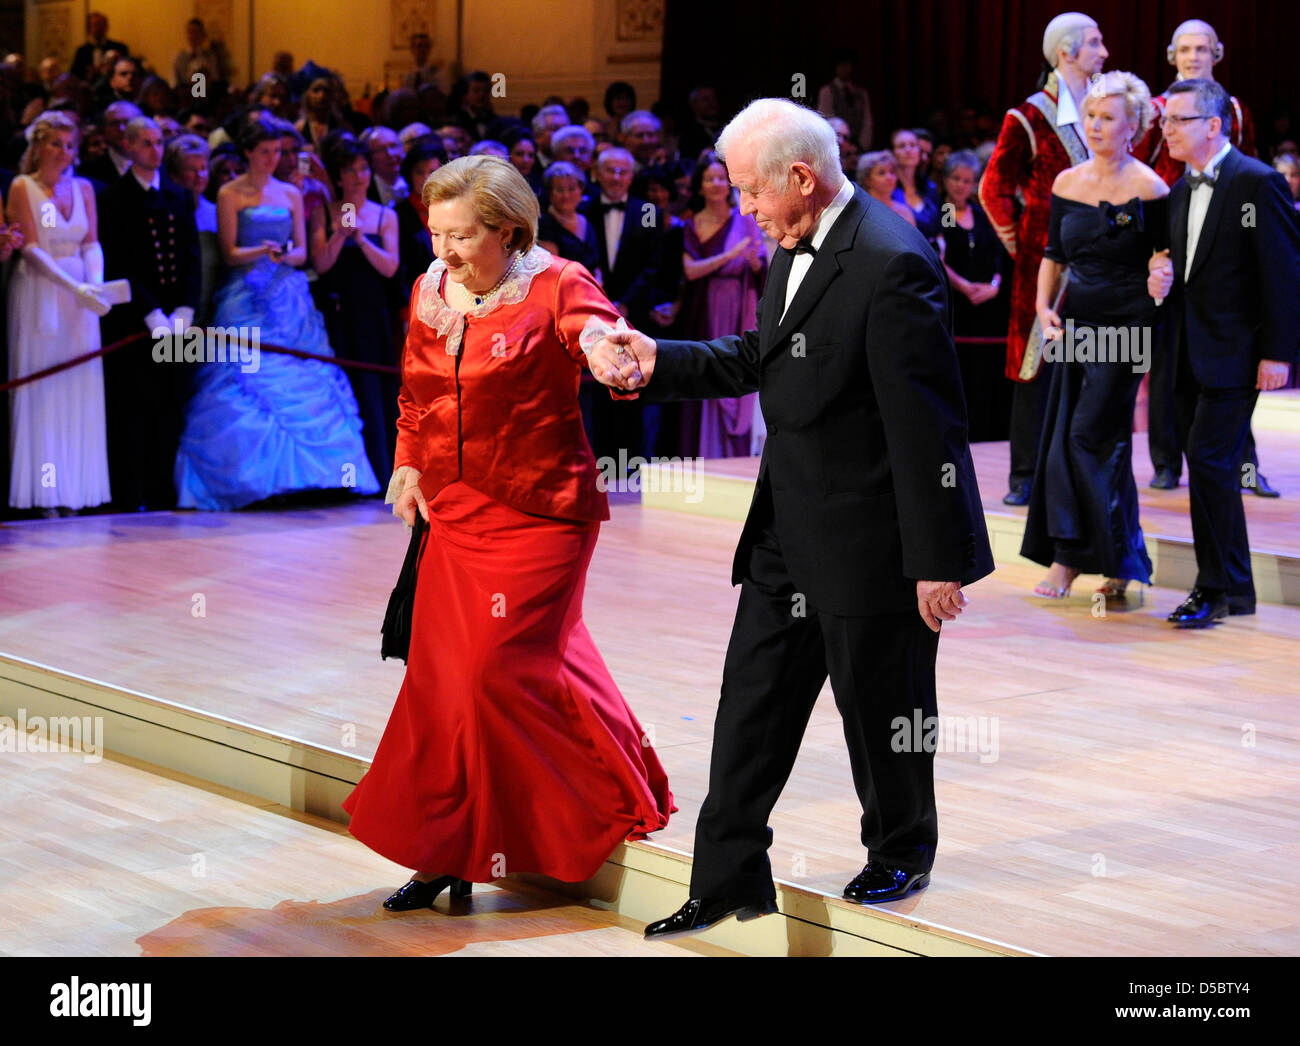 Former Saxony Premier Kurt Biedenkopf and his wife Ingrid dance during the 5th Semper opera ball in Dresden, Germany, 15 January 2010. Over 2,000 guests from economy, politics and culture celebrated under the motto 'Dreamteams' a ball night in the theatre built by Gottfried Semper (1803-1879). Stage and auditorium of the Semper opera were remodeled for this event. Photo: Jens Kalae Stock Photo